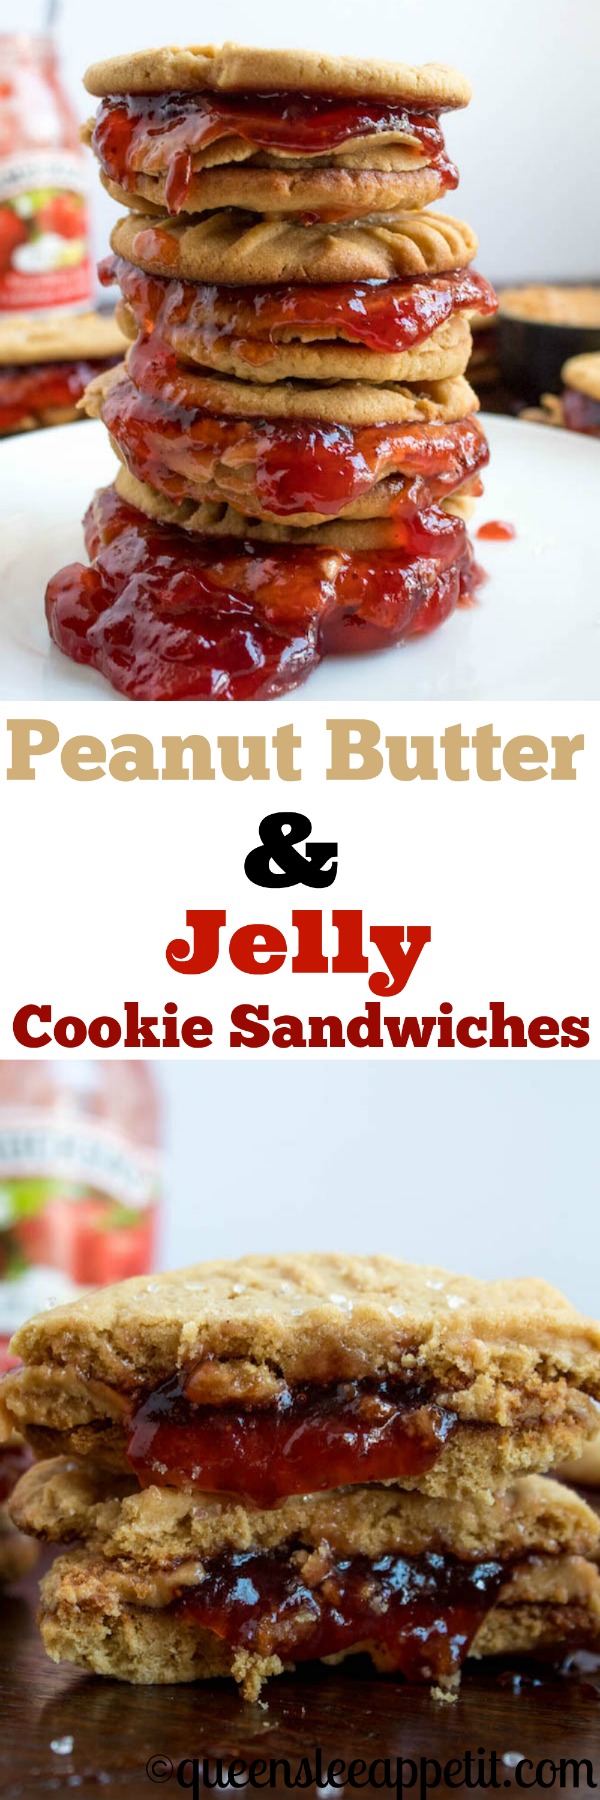 Soft and chewy peanut butter cookies filled with peanut butter frosting and strawberry jam. These Peanut Butter and Jelly Cookie Sandwiches are a sweet and amazing twist to the classic childhood favourite!